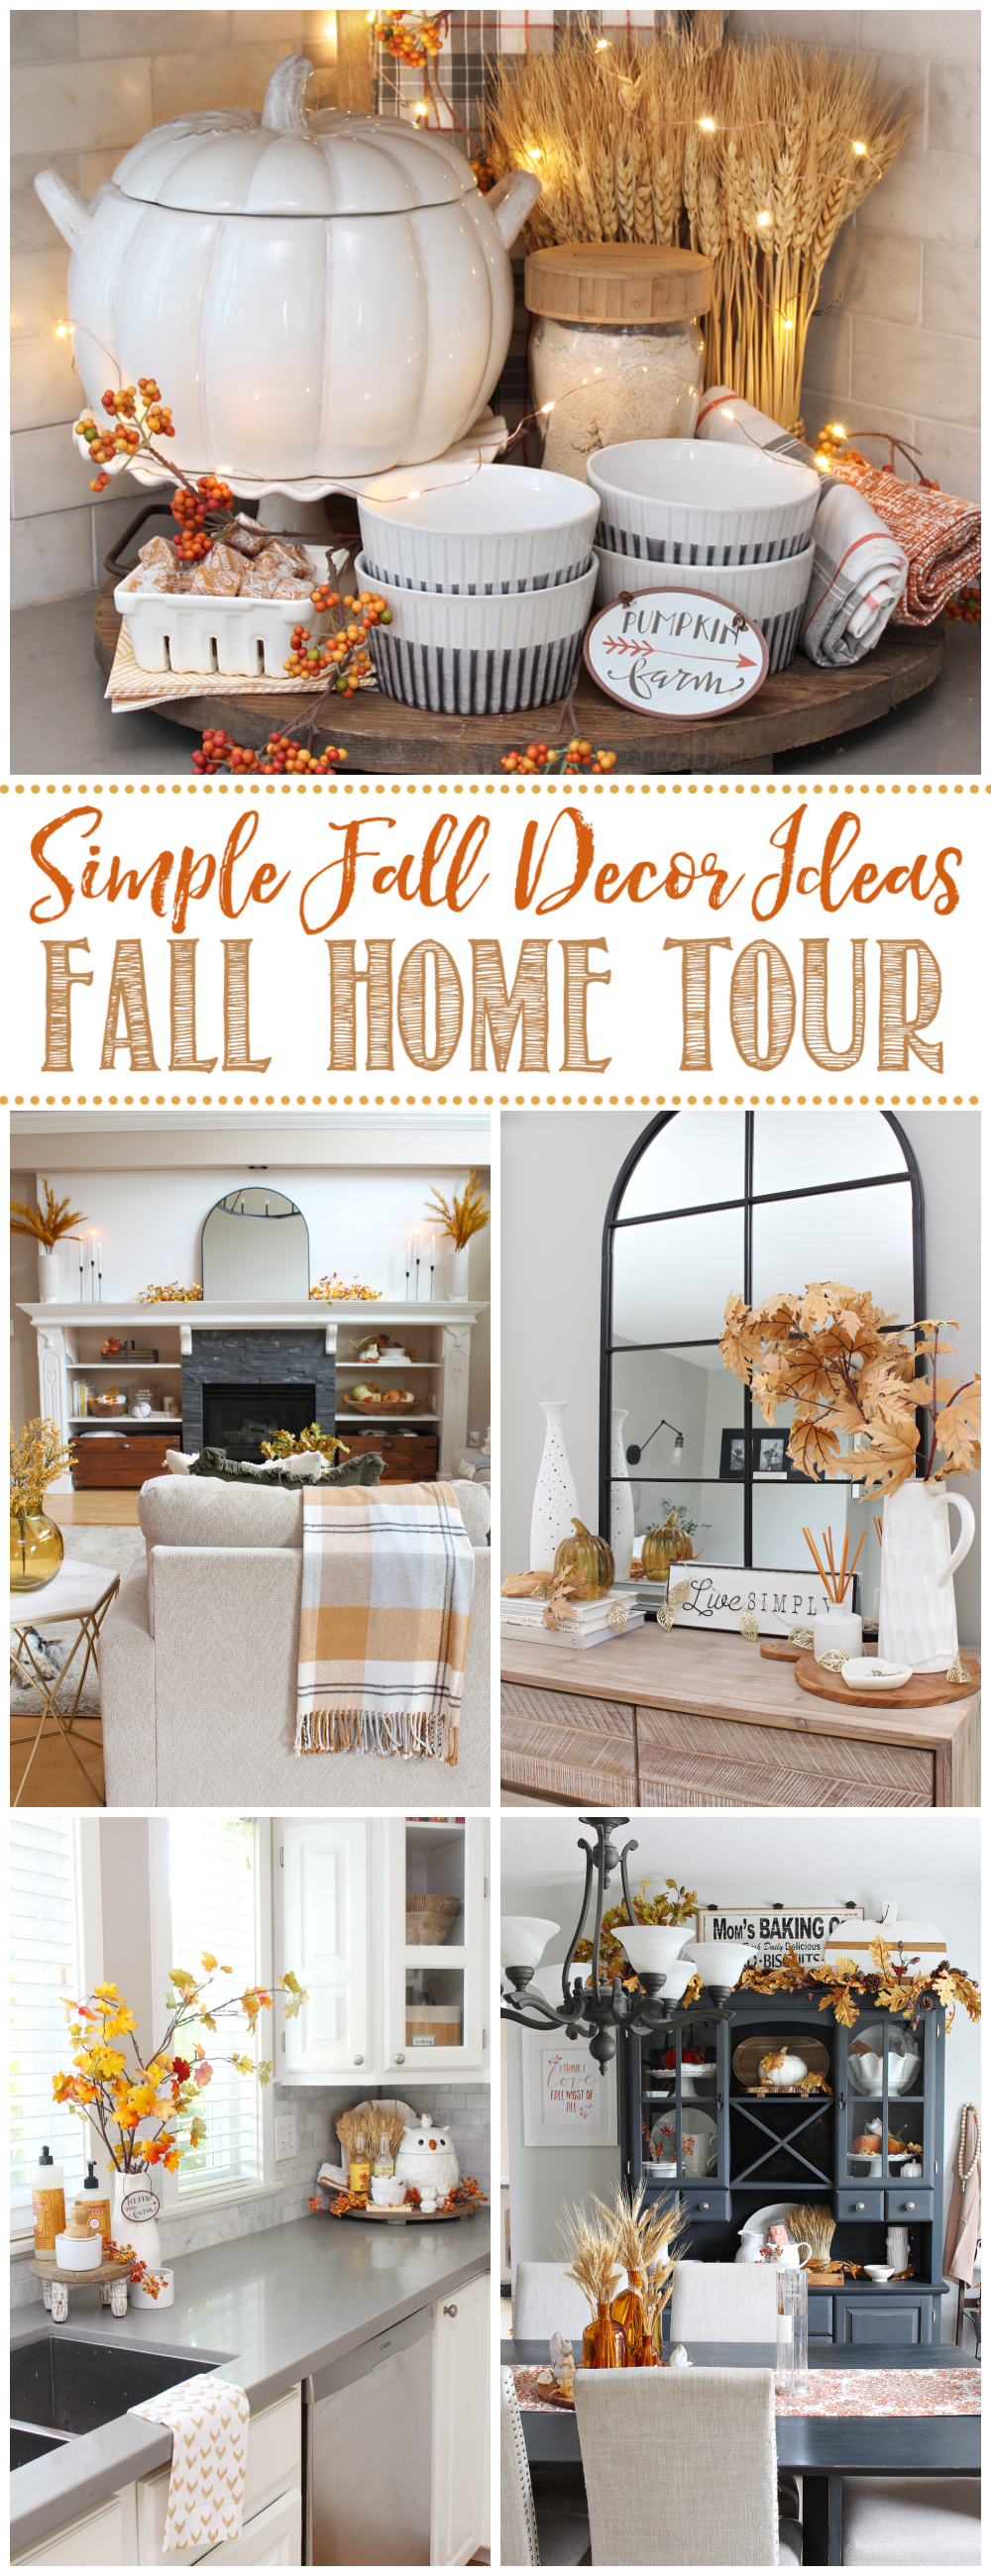 Collage of fall home decorating ideas.